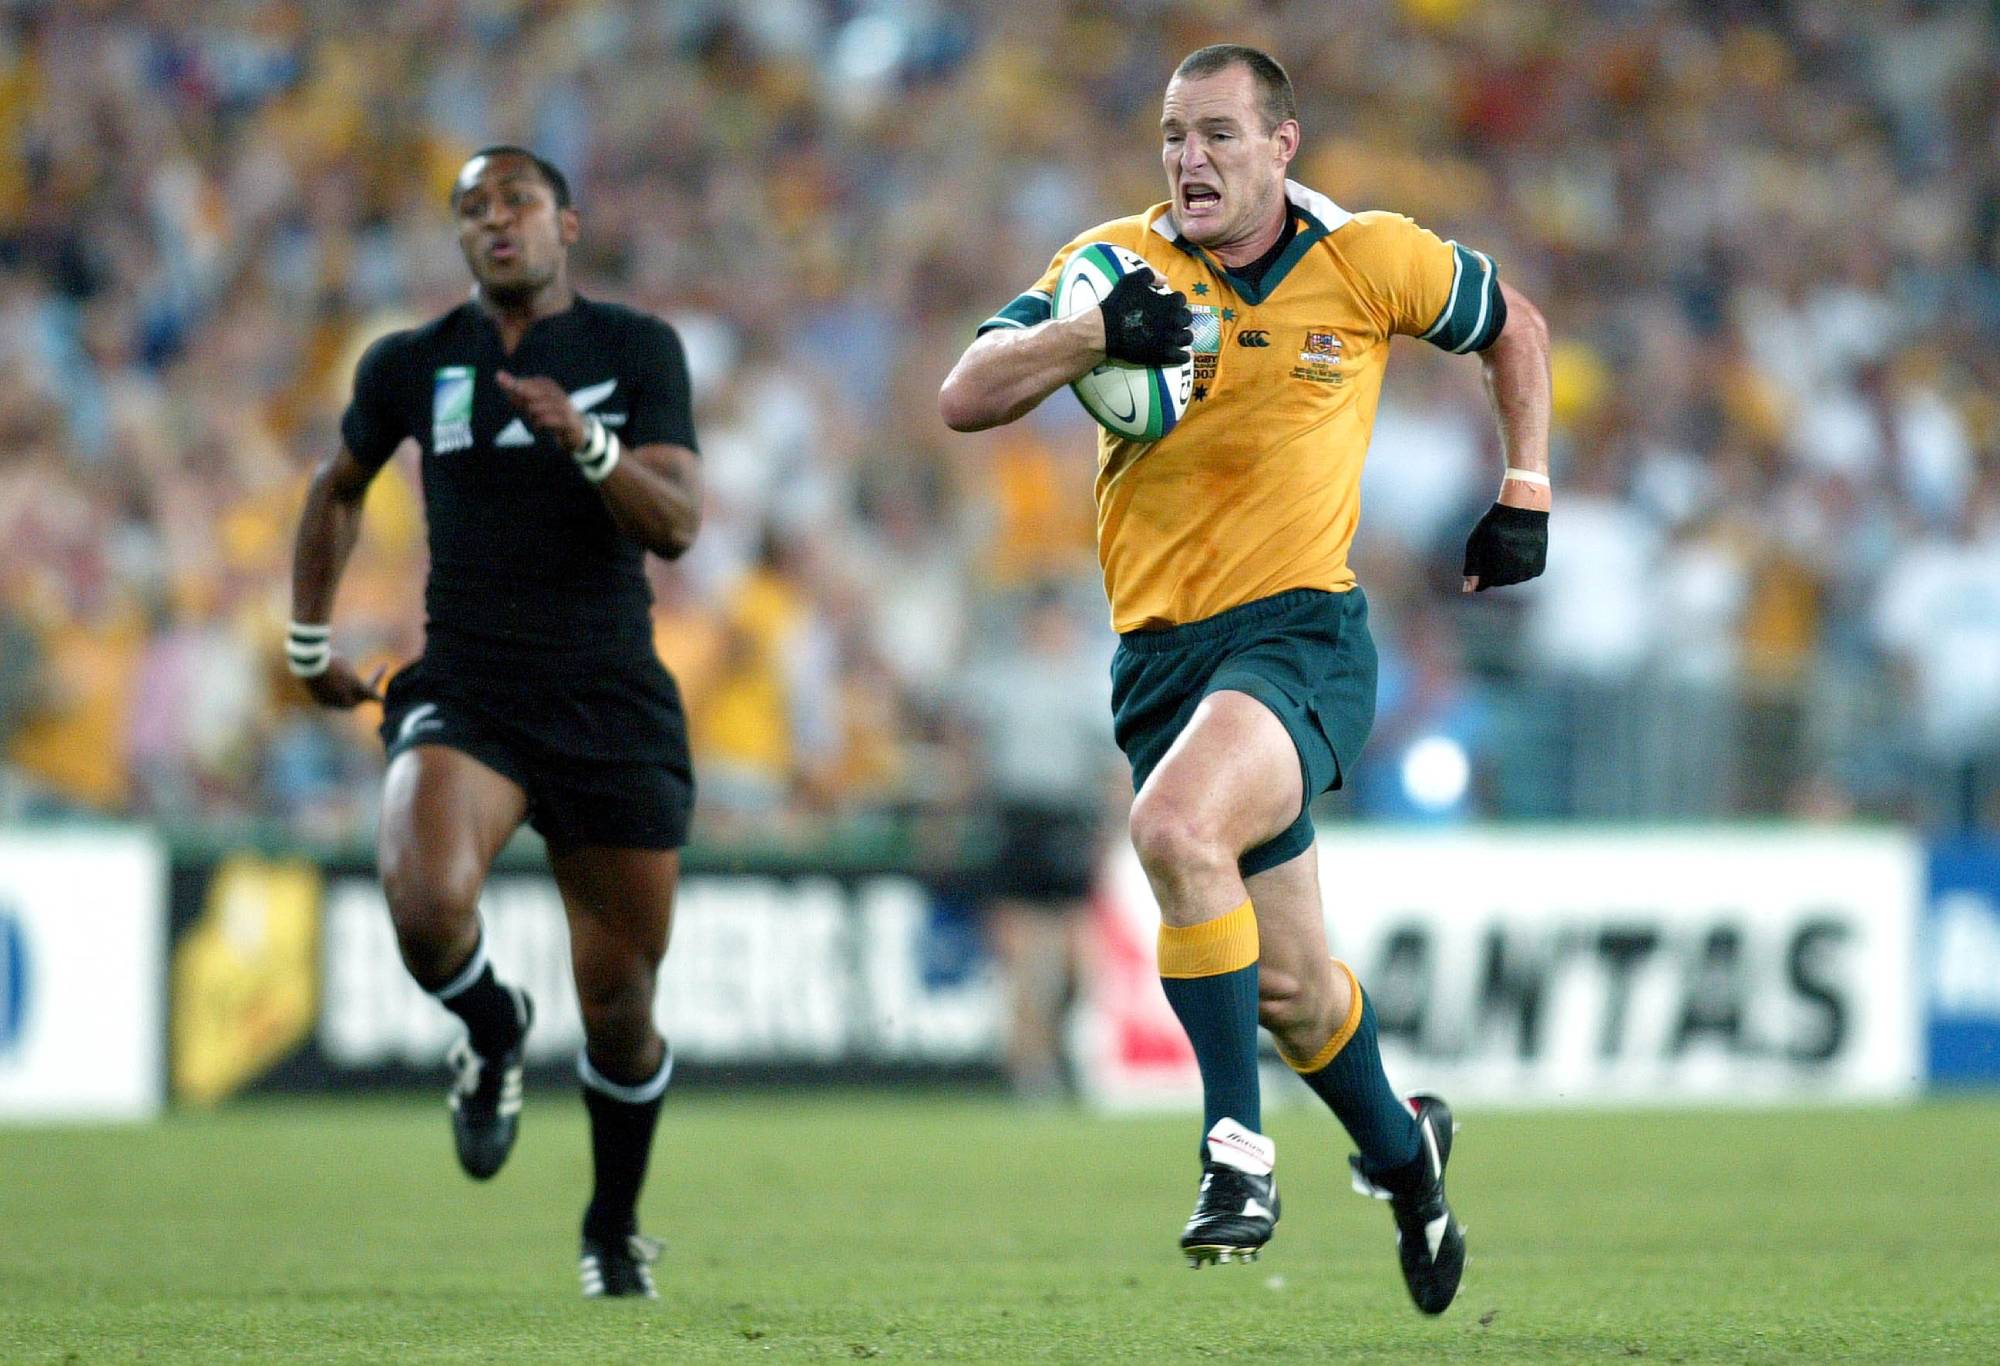 Stirling Mortlock runs to score Australia's first try. Rugby - Coupe du Monde 2003 - Semifinals: Australia v Nouvelle-Zélande. Stirling Mortlock (Australia) on the author and other contributors (Photo by Manuel Blondeau/Photo & Co./Corbis/VCG via Getty Images)